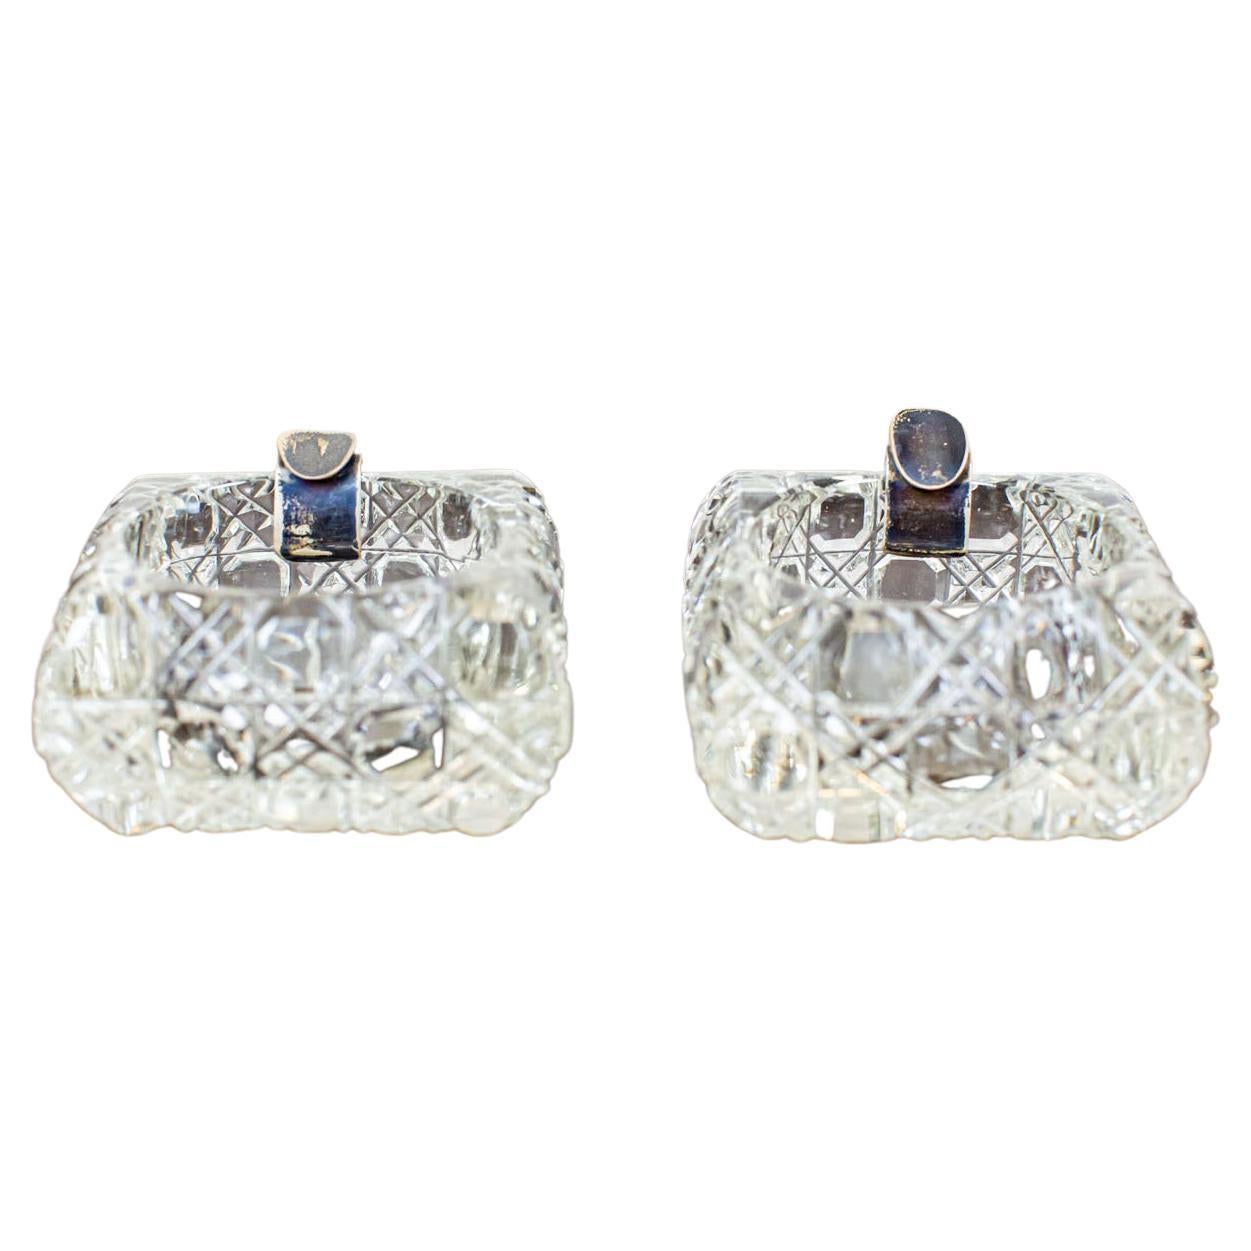 Two Crystal Ashtrays from the Early 20th Century